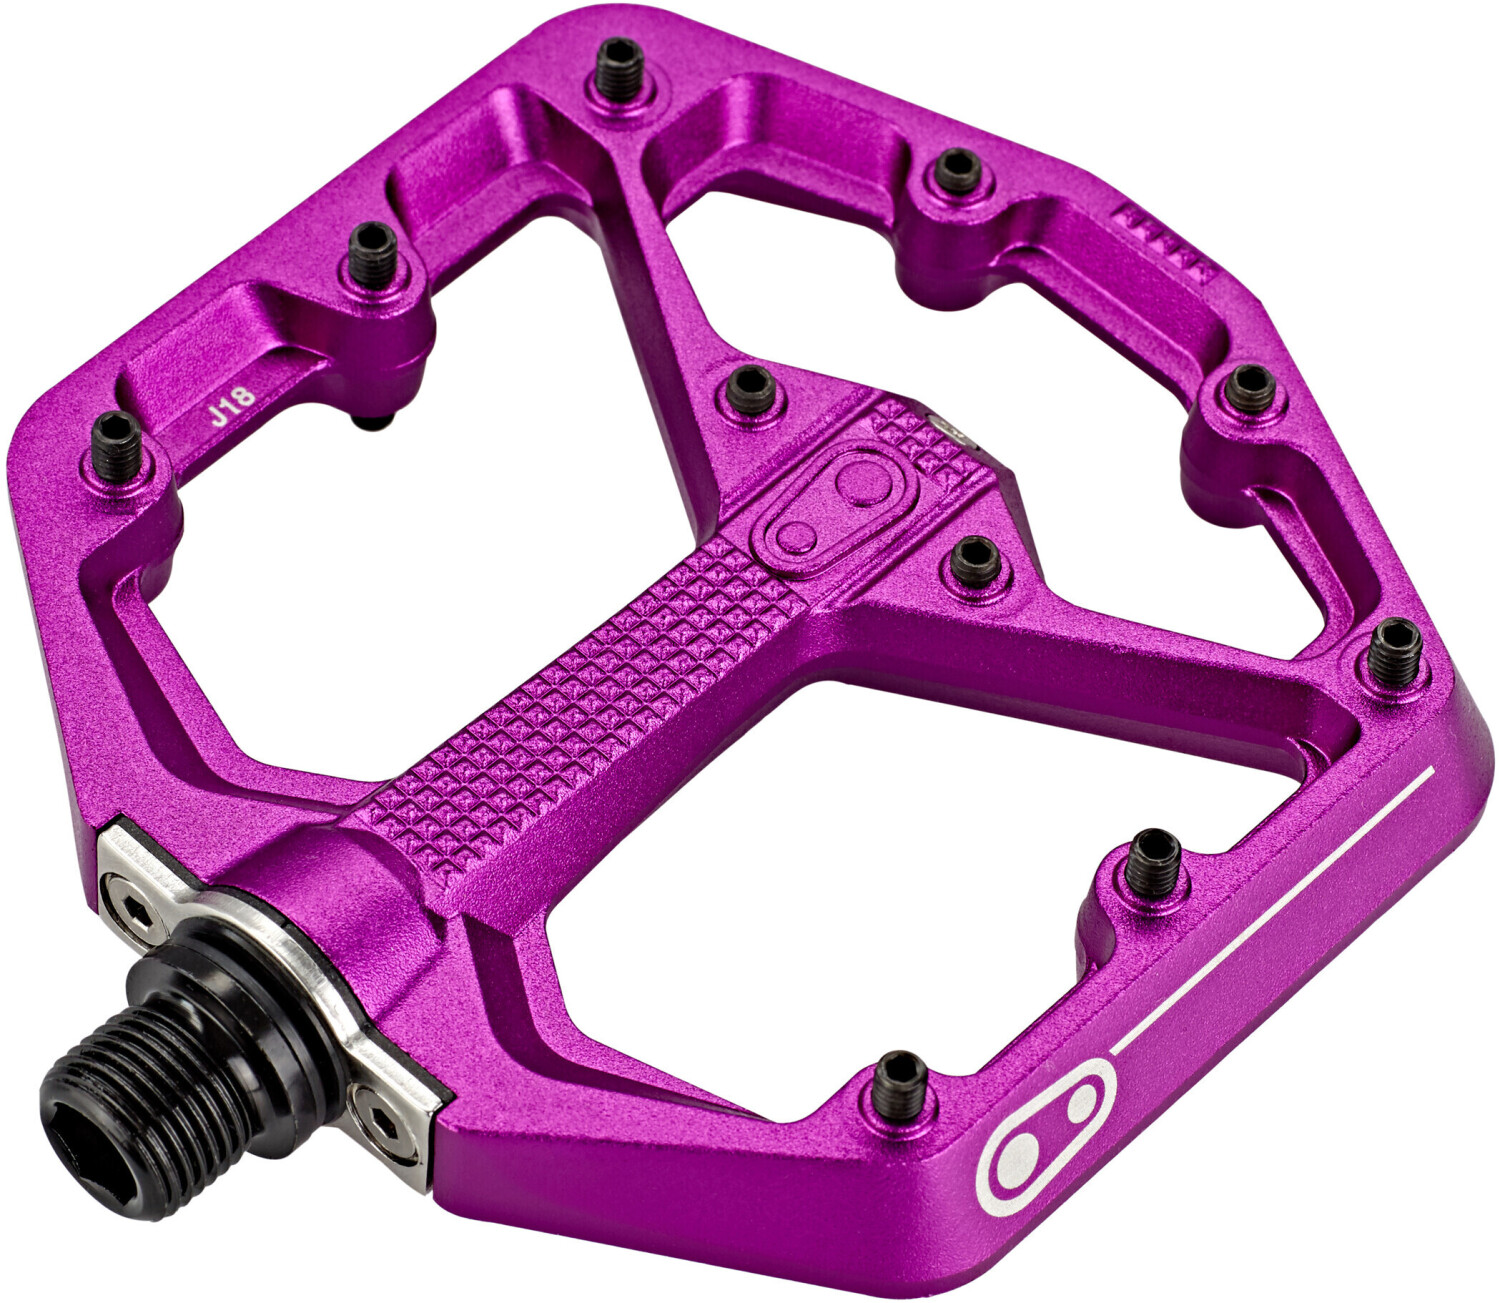 Crankbrothers Stamp 7 Small Flat Pedals - purple